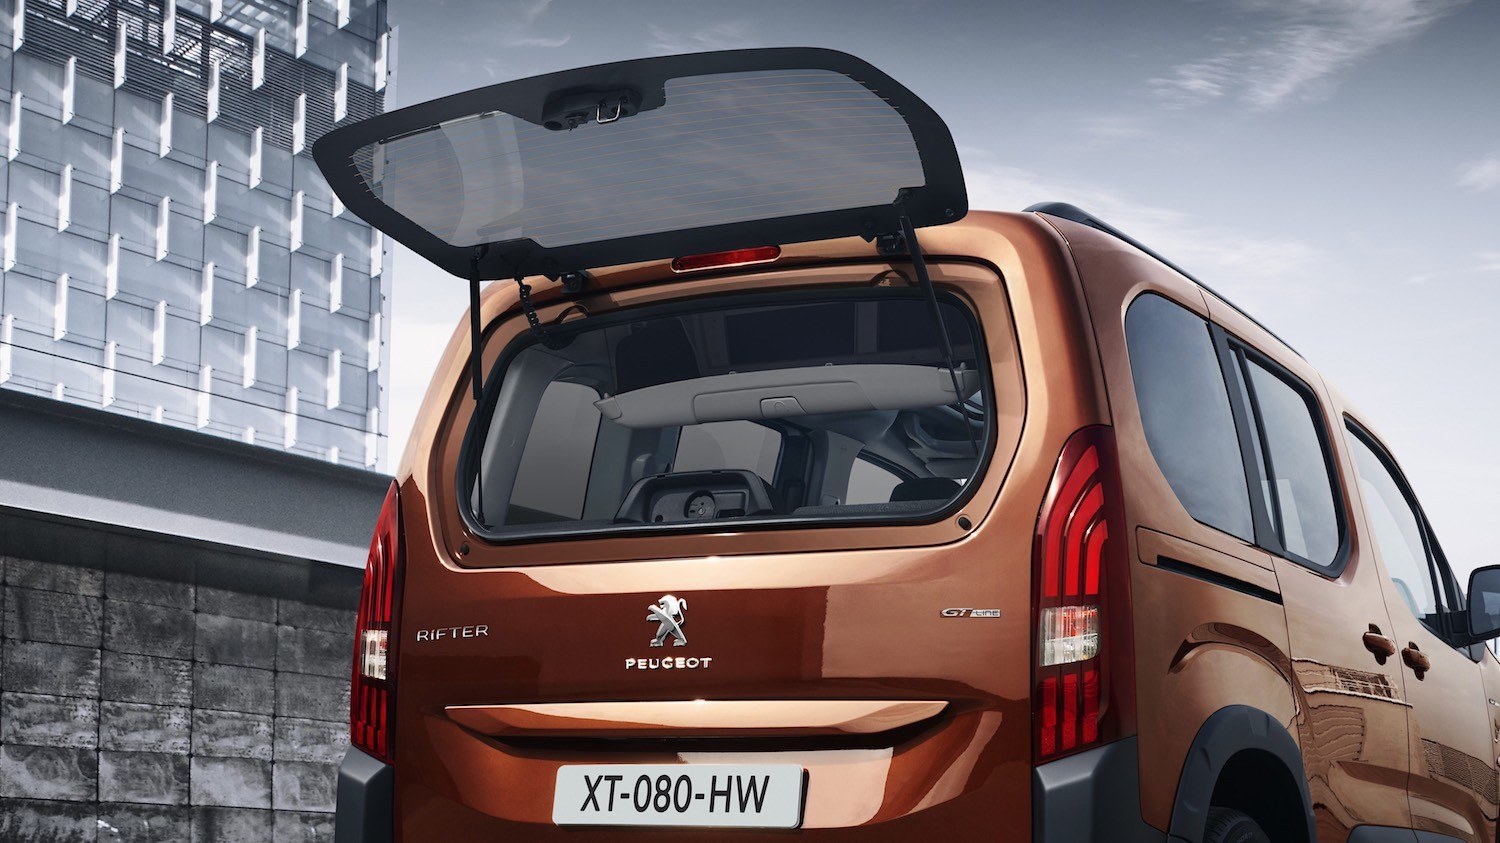 Tim Barnes-Clay reviews the Peugeot Rifter from the European Launch 8